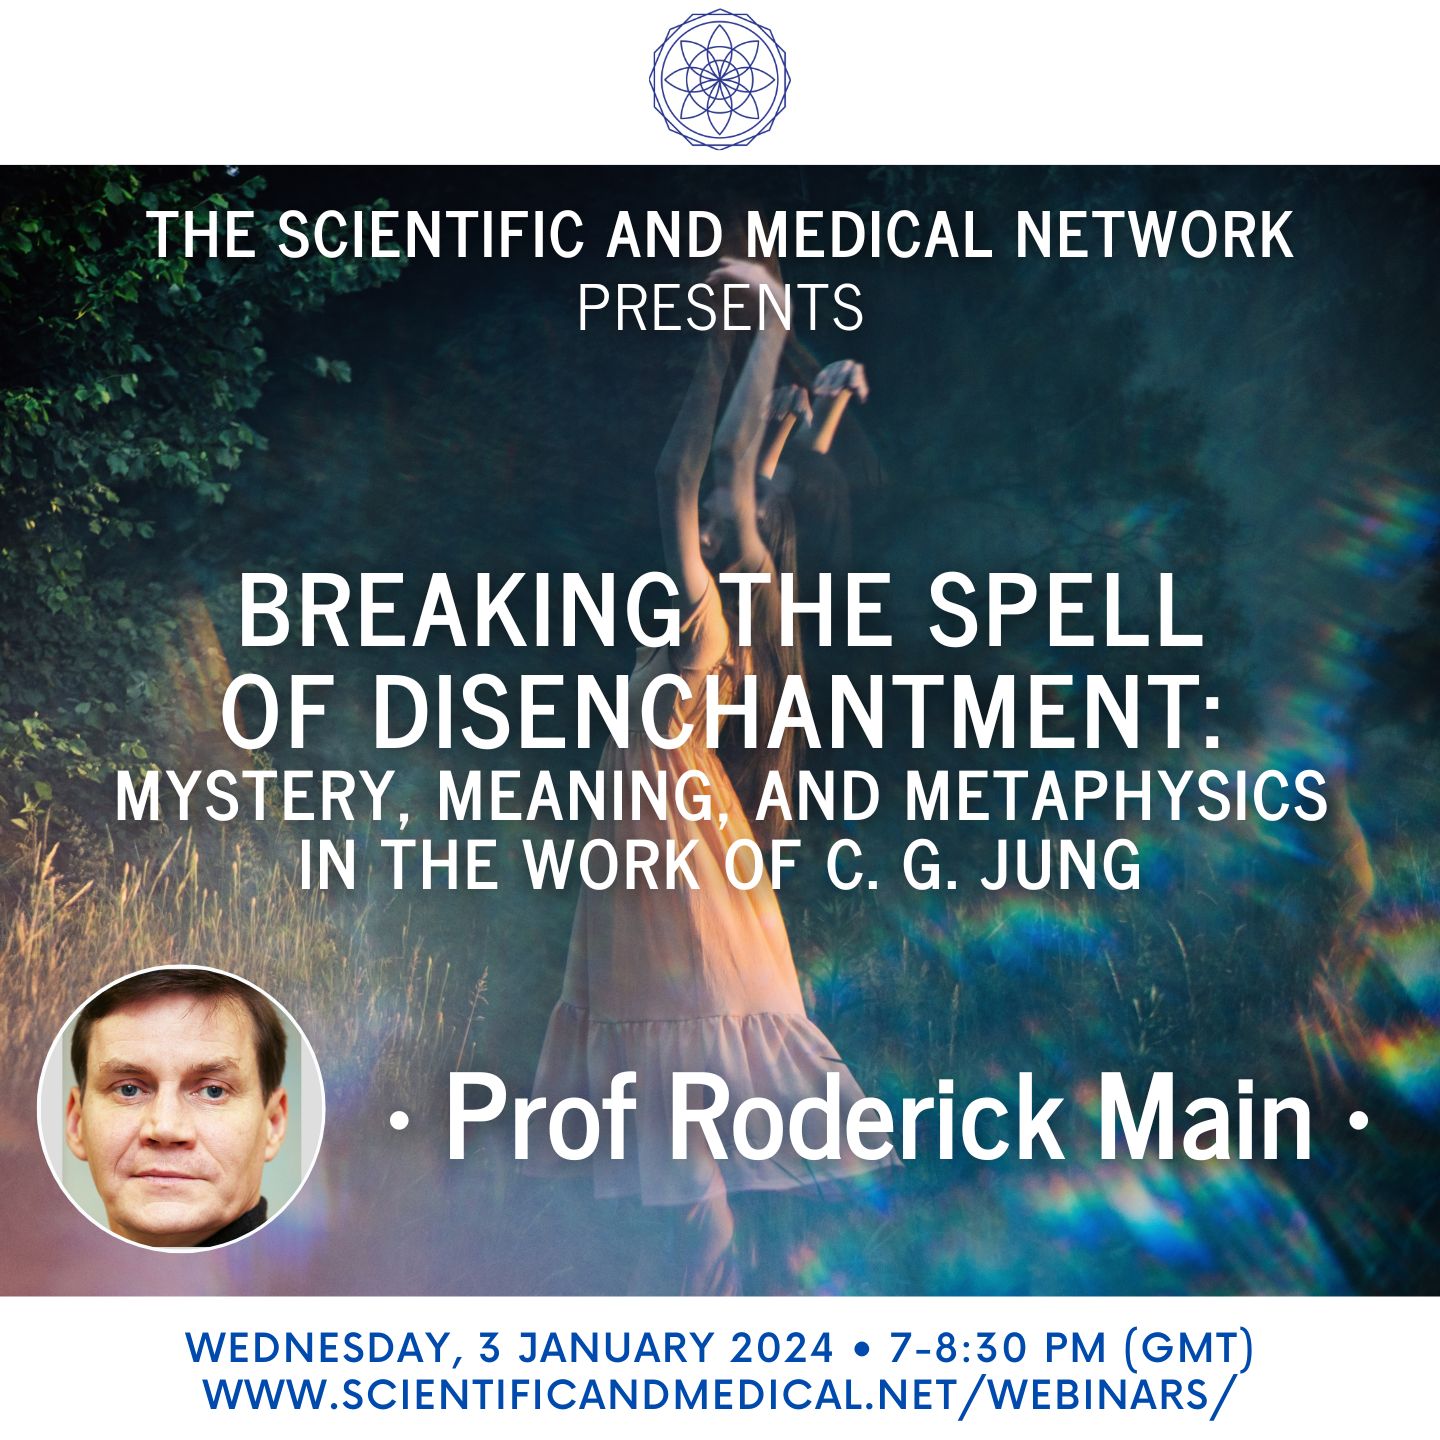 Prof Roderick Main – Breaking the Spell of Disenchantment Mystery Meaning and Metaphysics in the Work of C. G. Jung